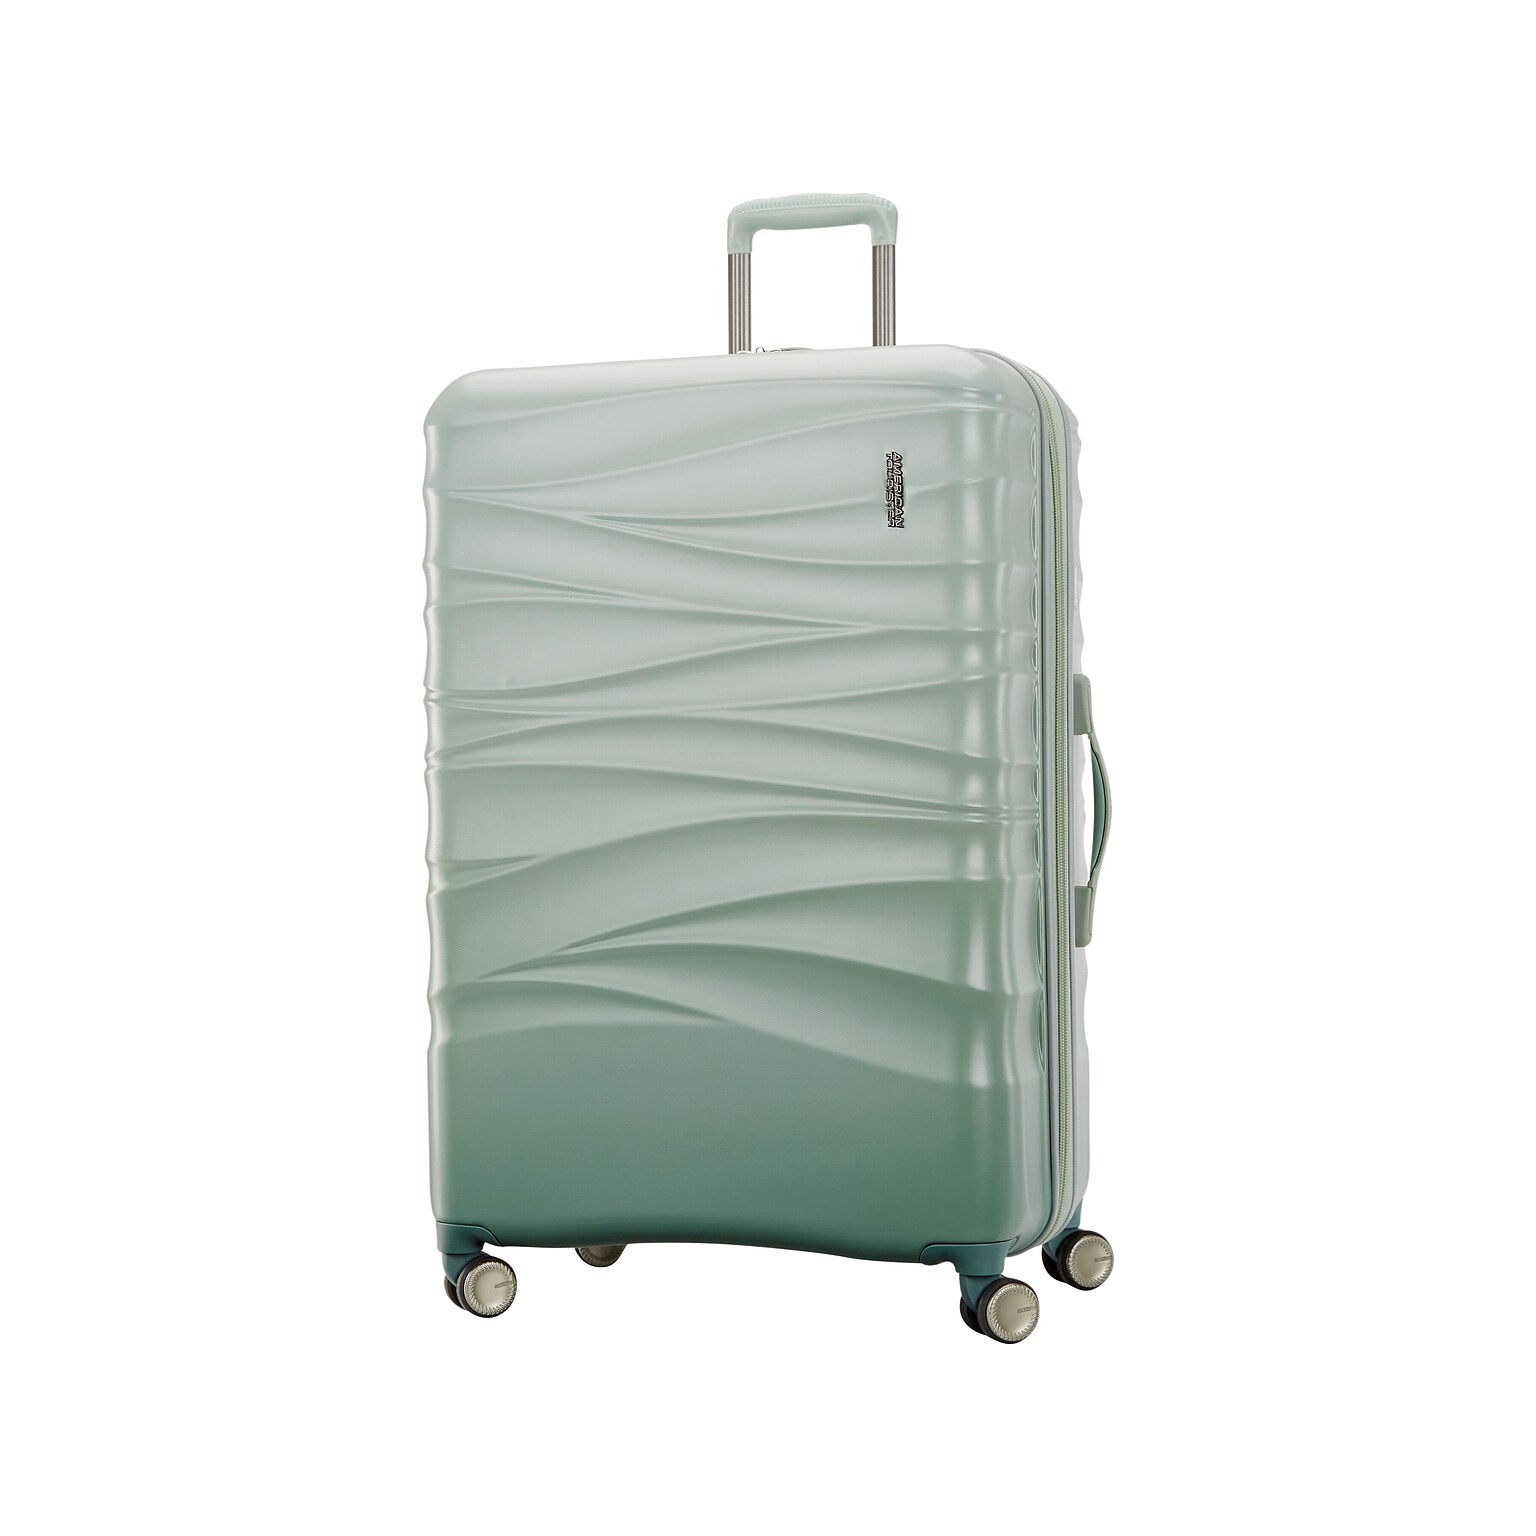 American Tourister Cascade 31 Hardside Suitcase, 4-Wheeled Spinner, Sage Green (143314-2017)